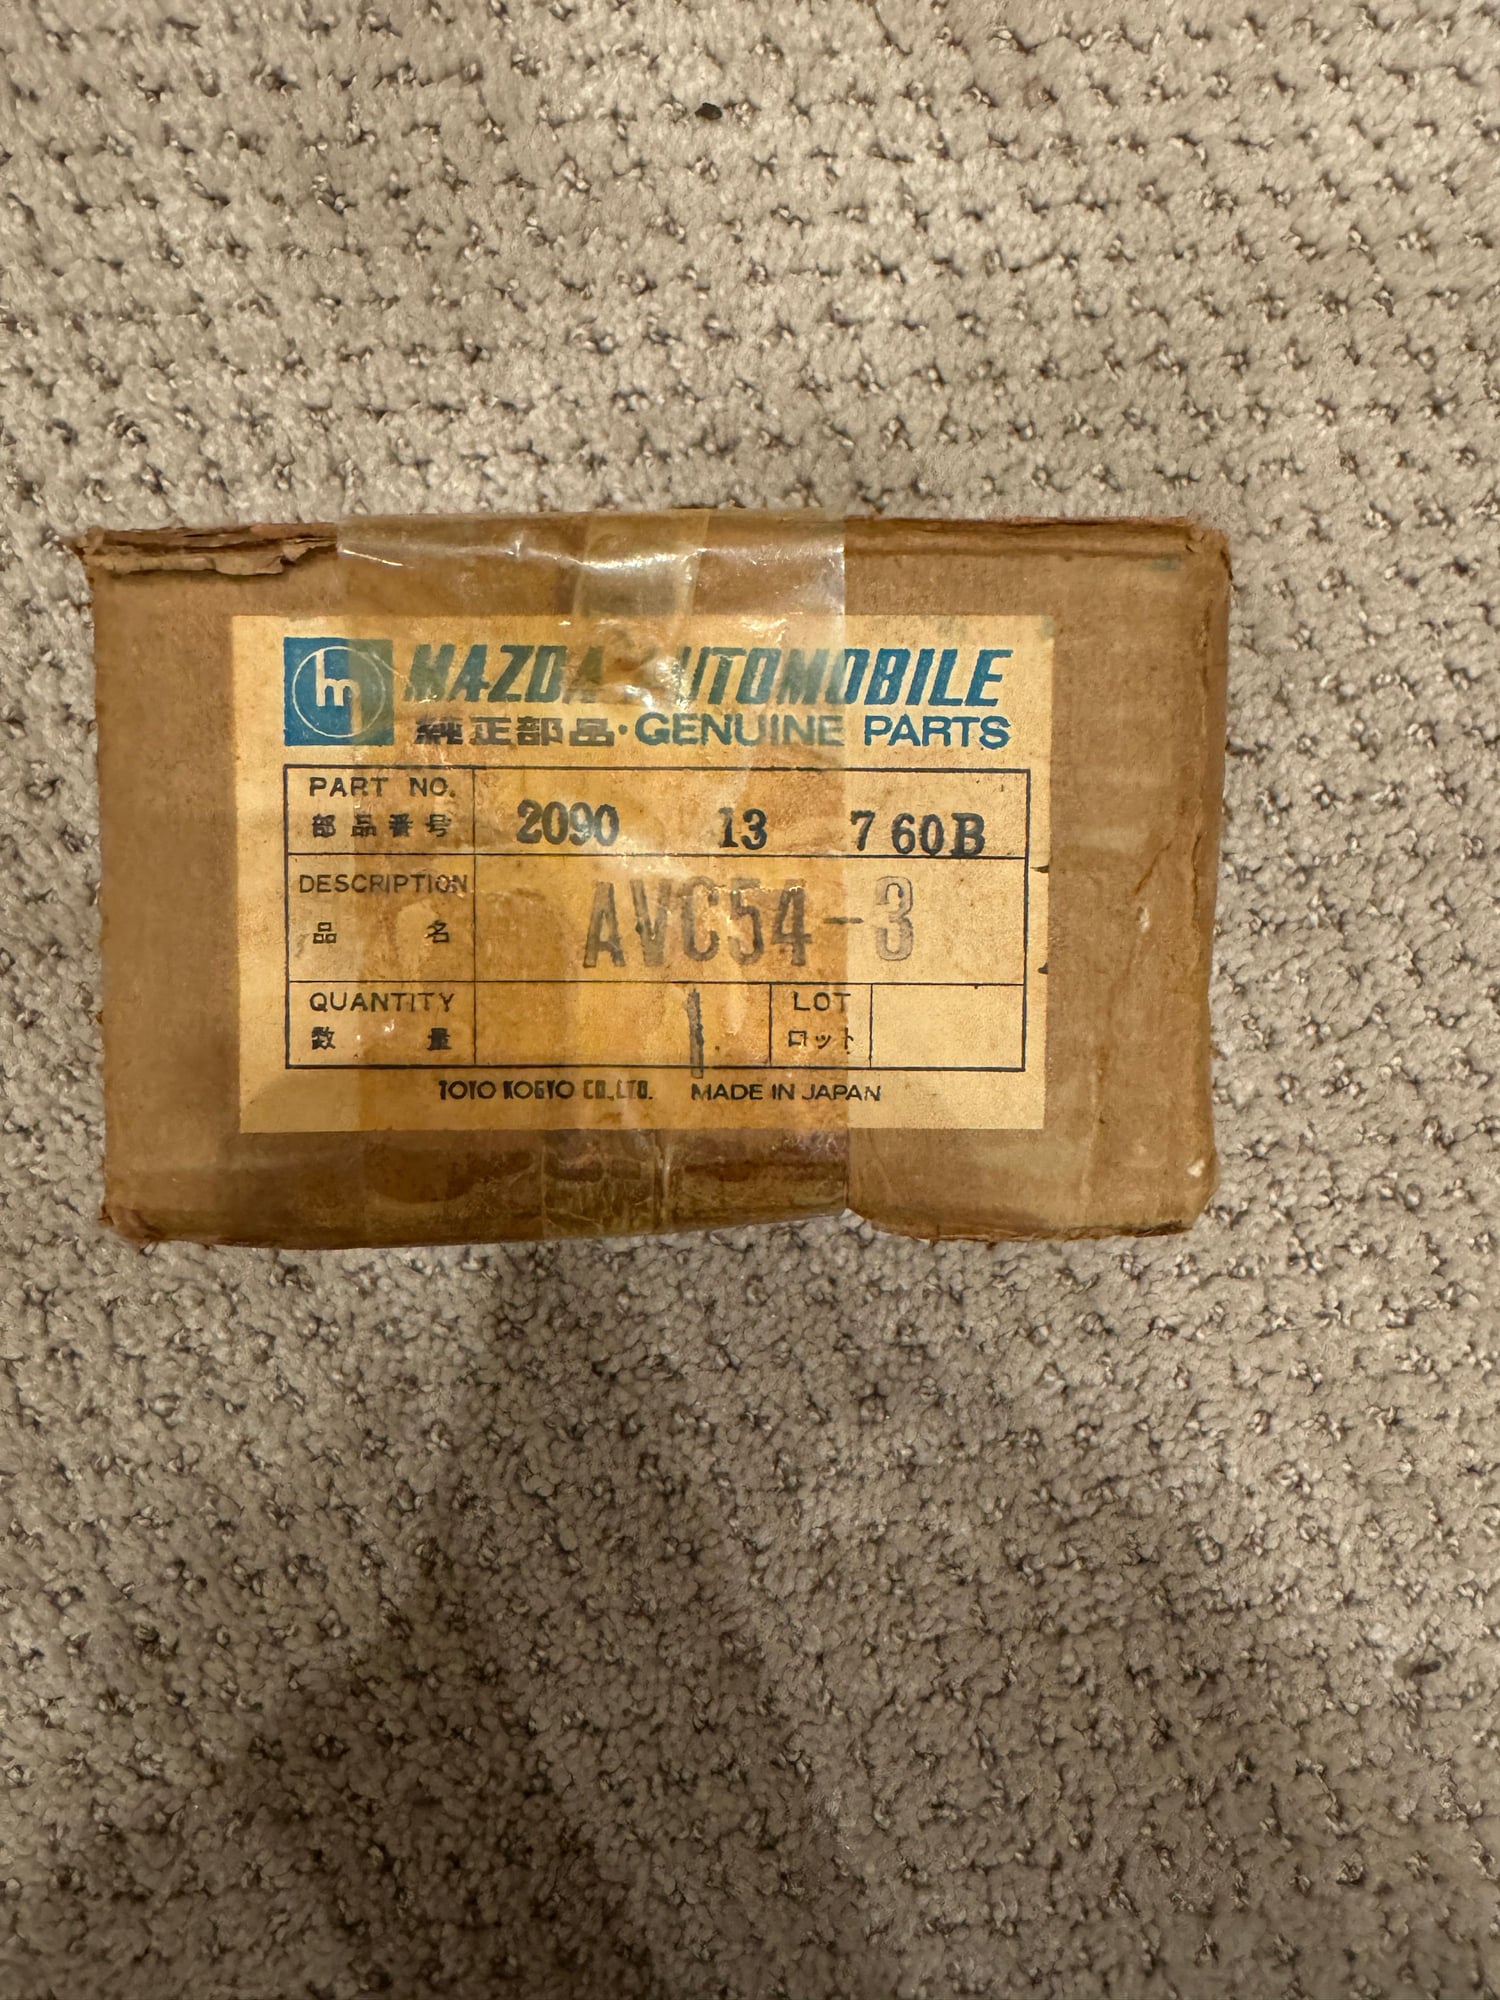 Miscellaneous - NOS Coast Valve - New - All Years  All Models - Watsonville, CA 95076, United States